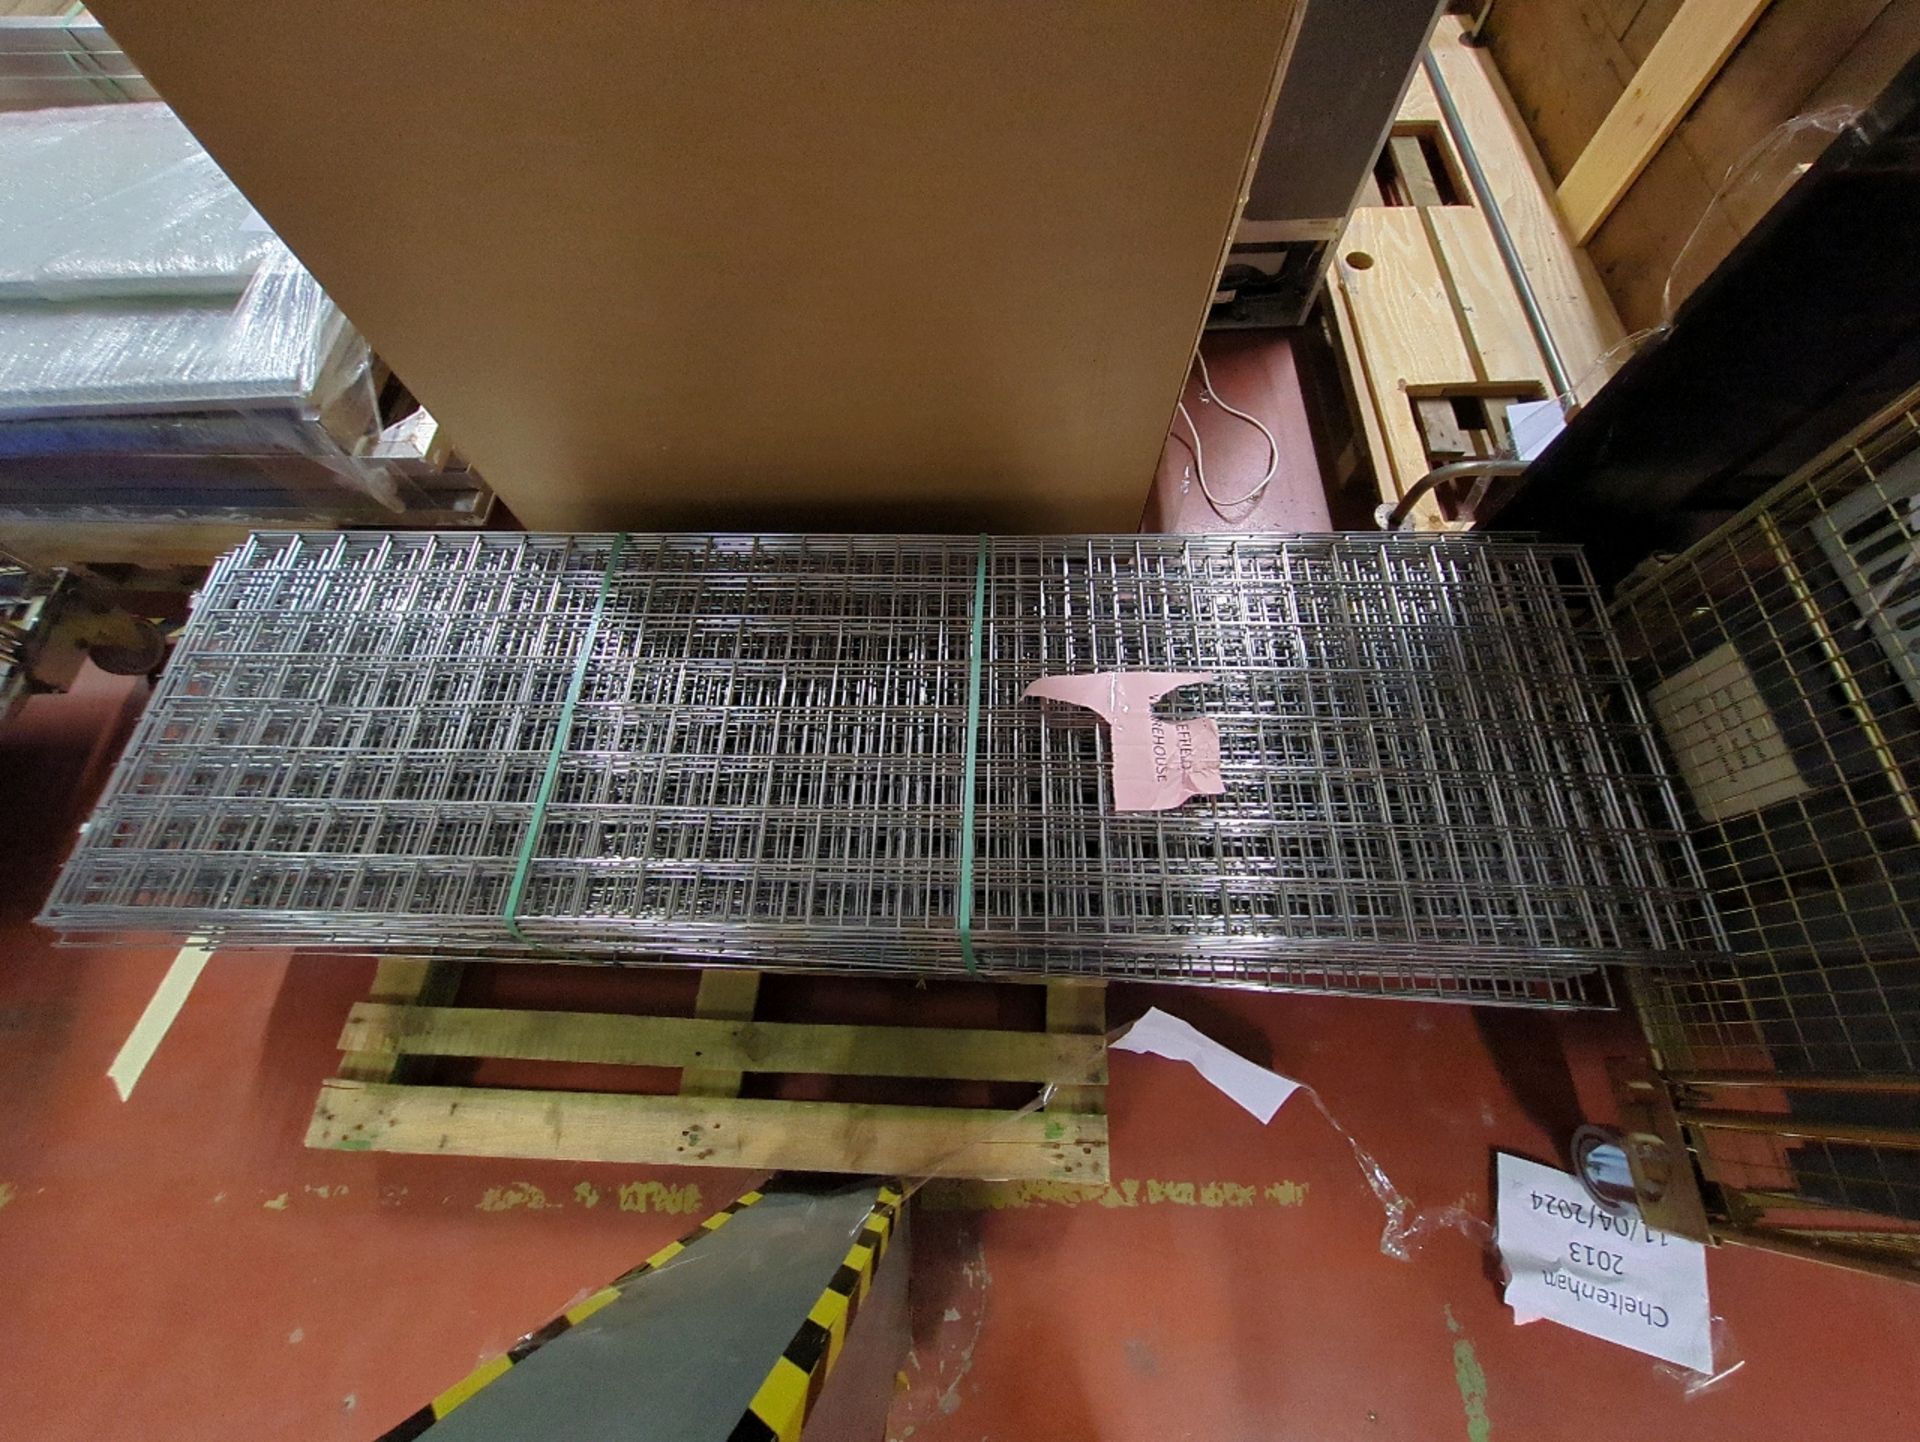 Wall Caging For Shelf Mount - Image 3 of 4